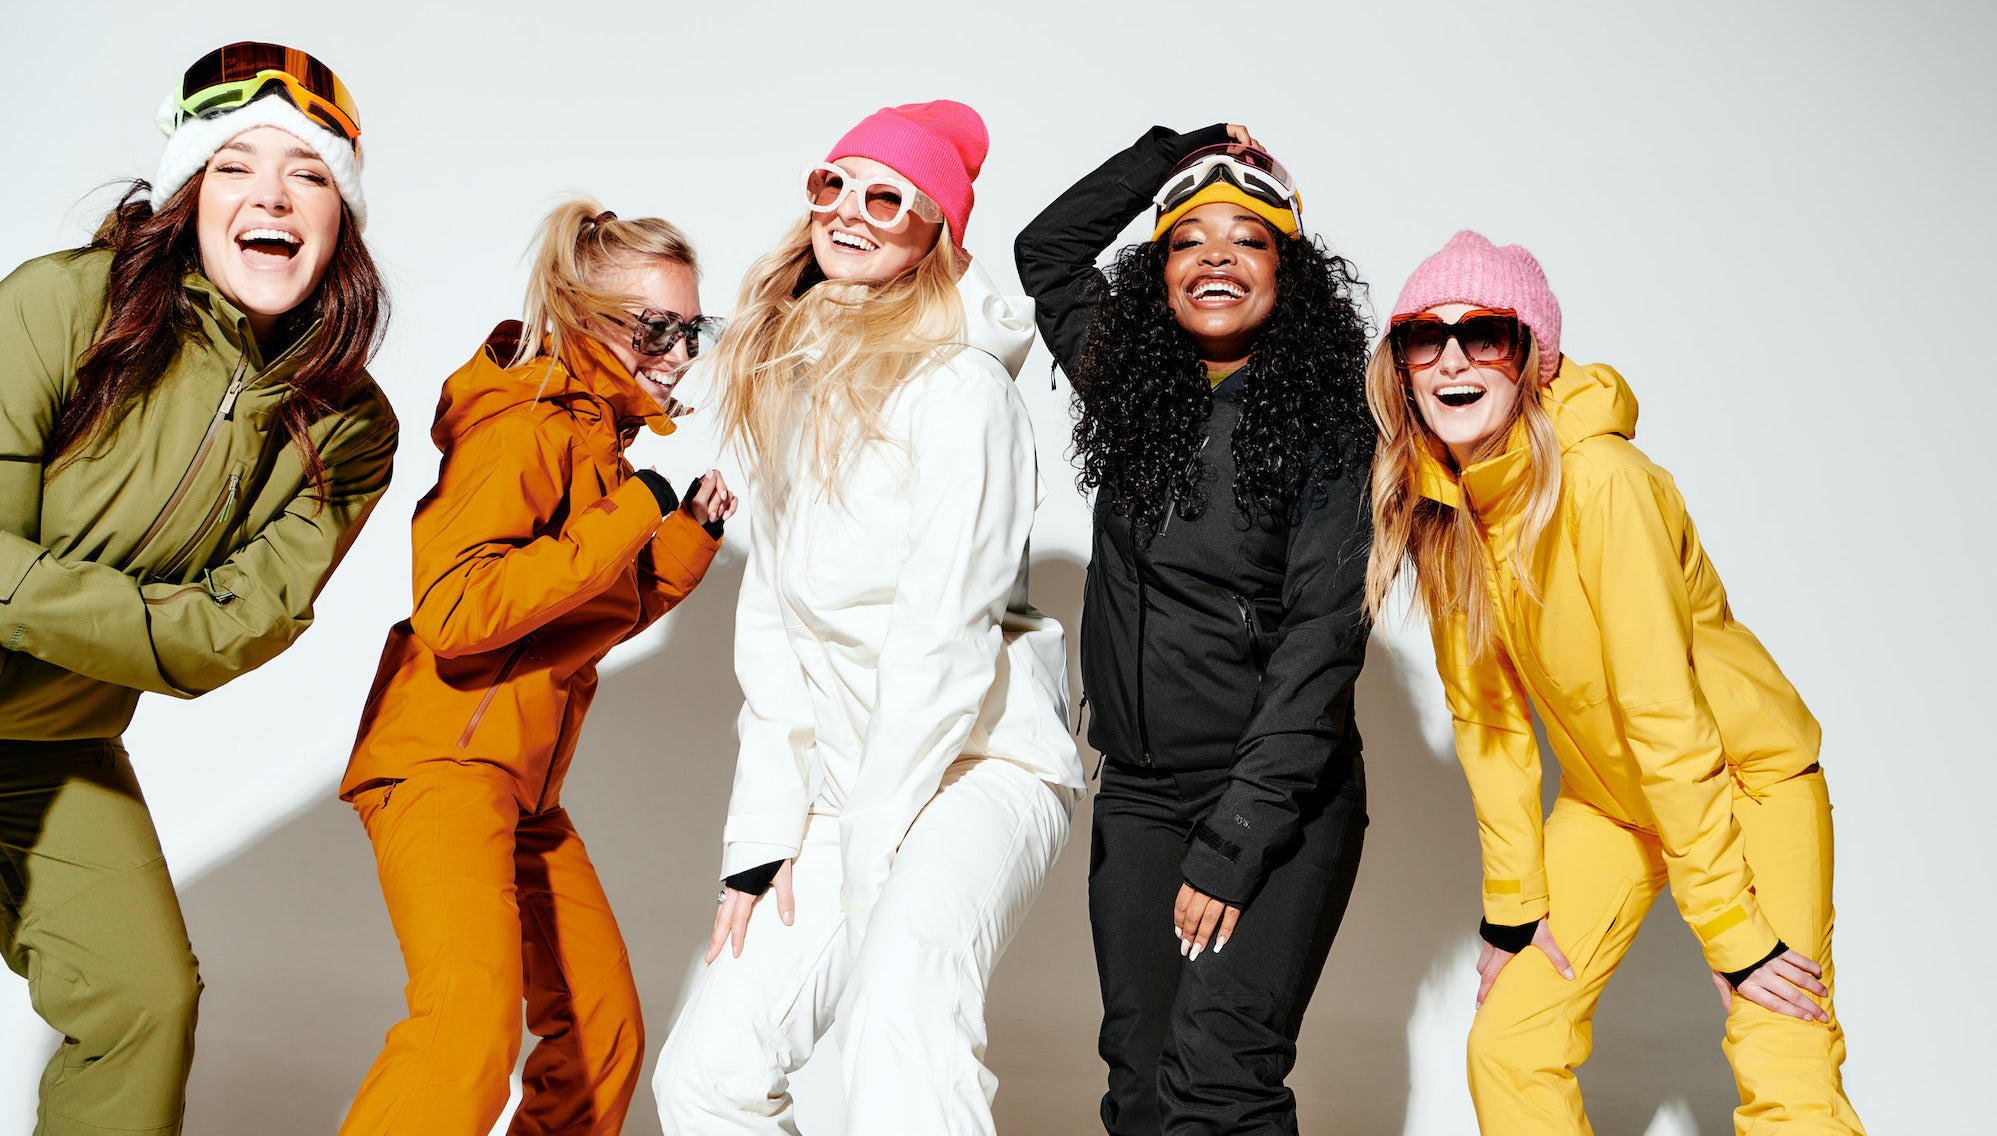 Meet Halfdays, the woman-owned brand behind the ultra-chic ski